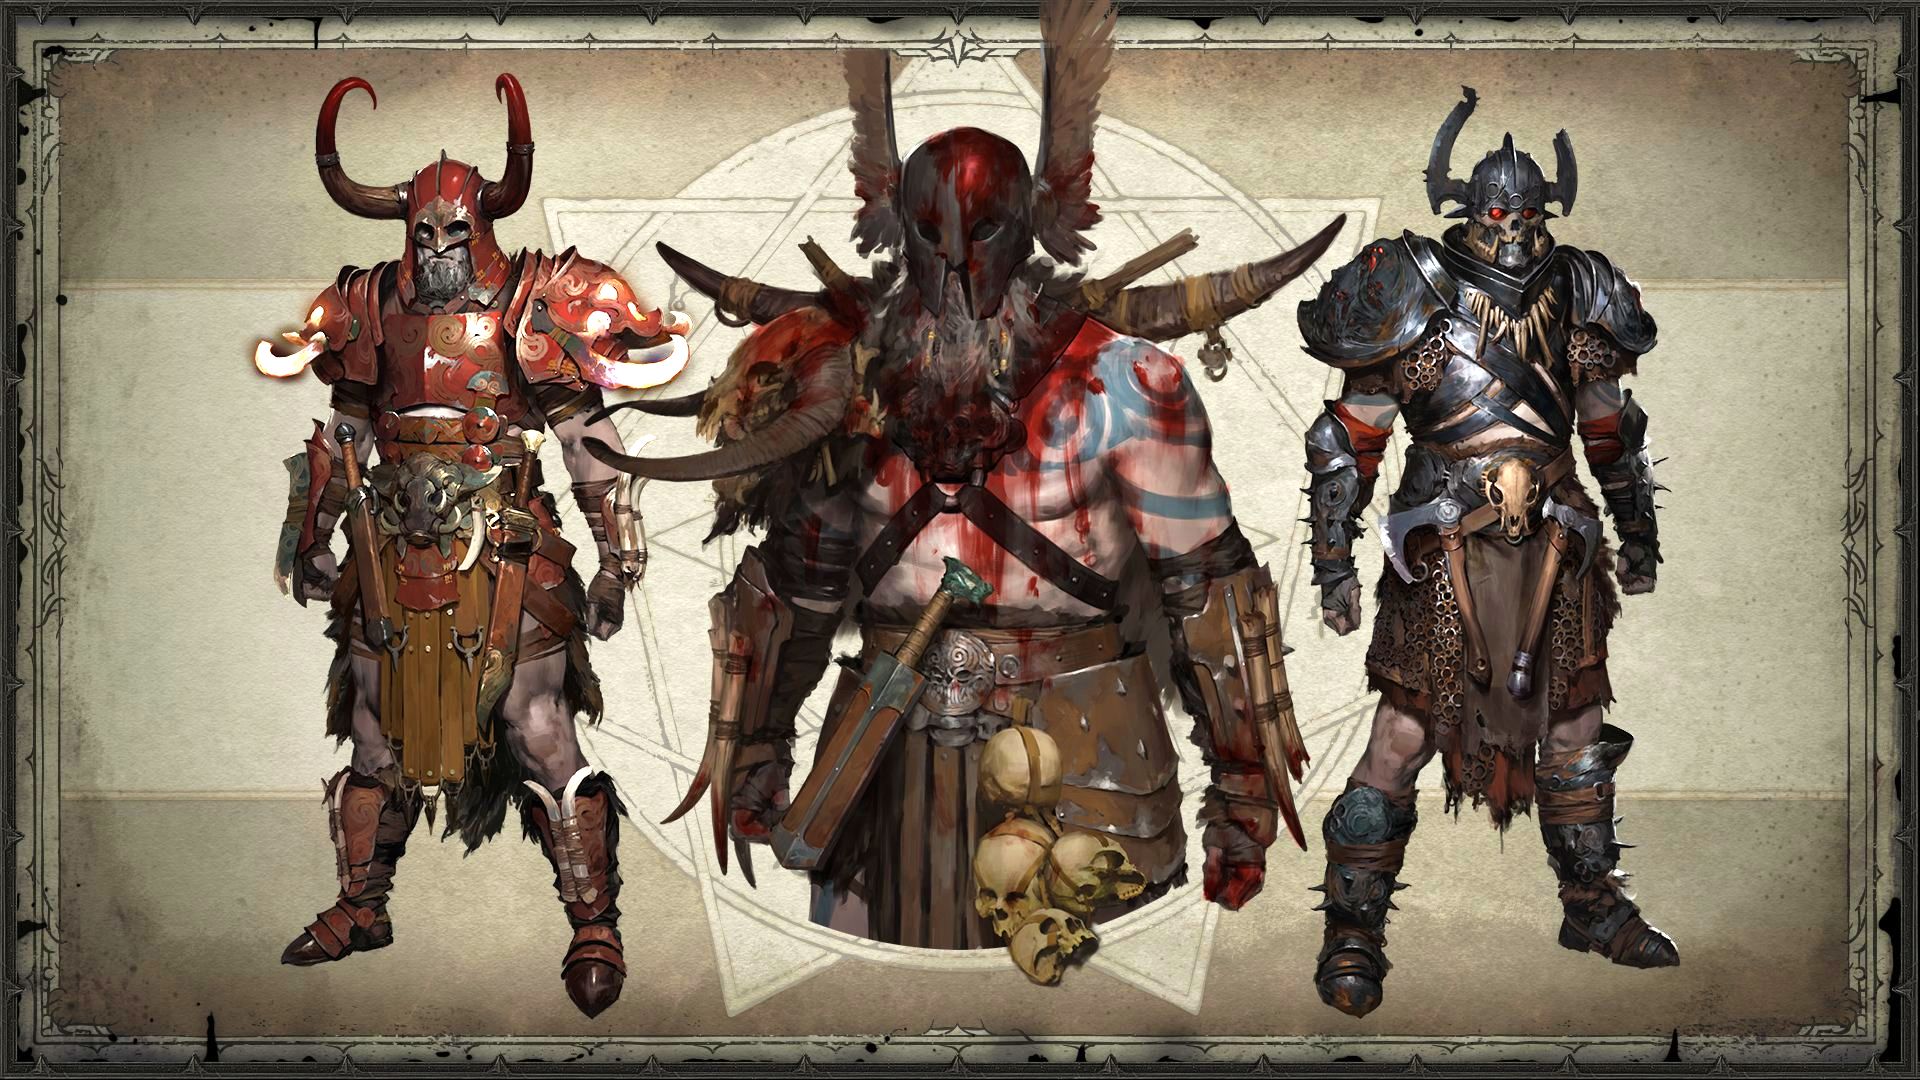 Diablo 4 Barbarian build: Concept art of the armour and equipment teased prior to the Diablo 4 beta, ranging from ornate platemail to leather wraps and bone accoutrements.